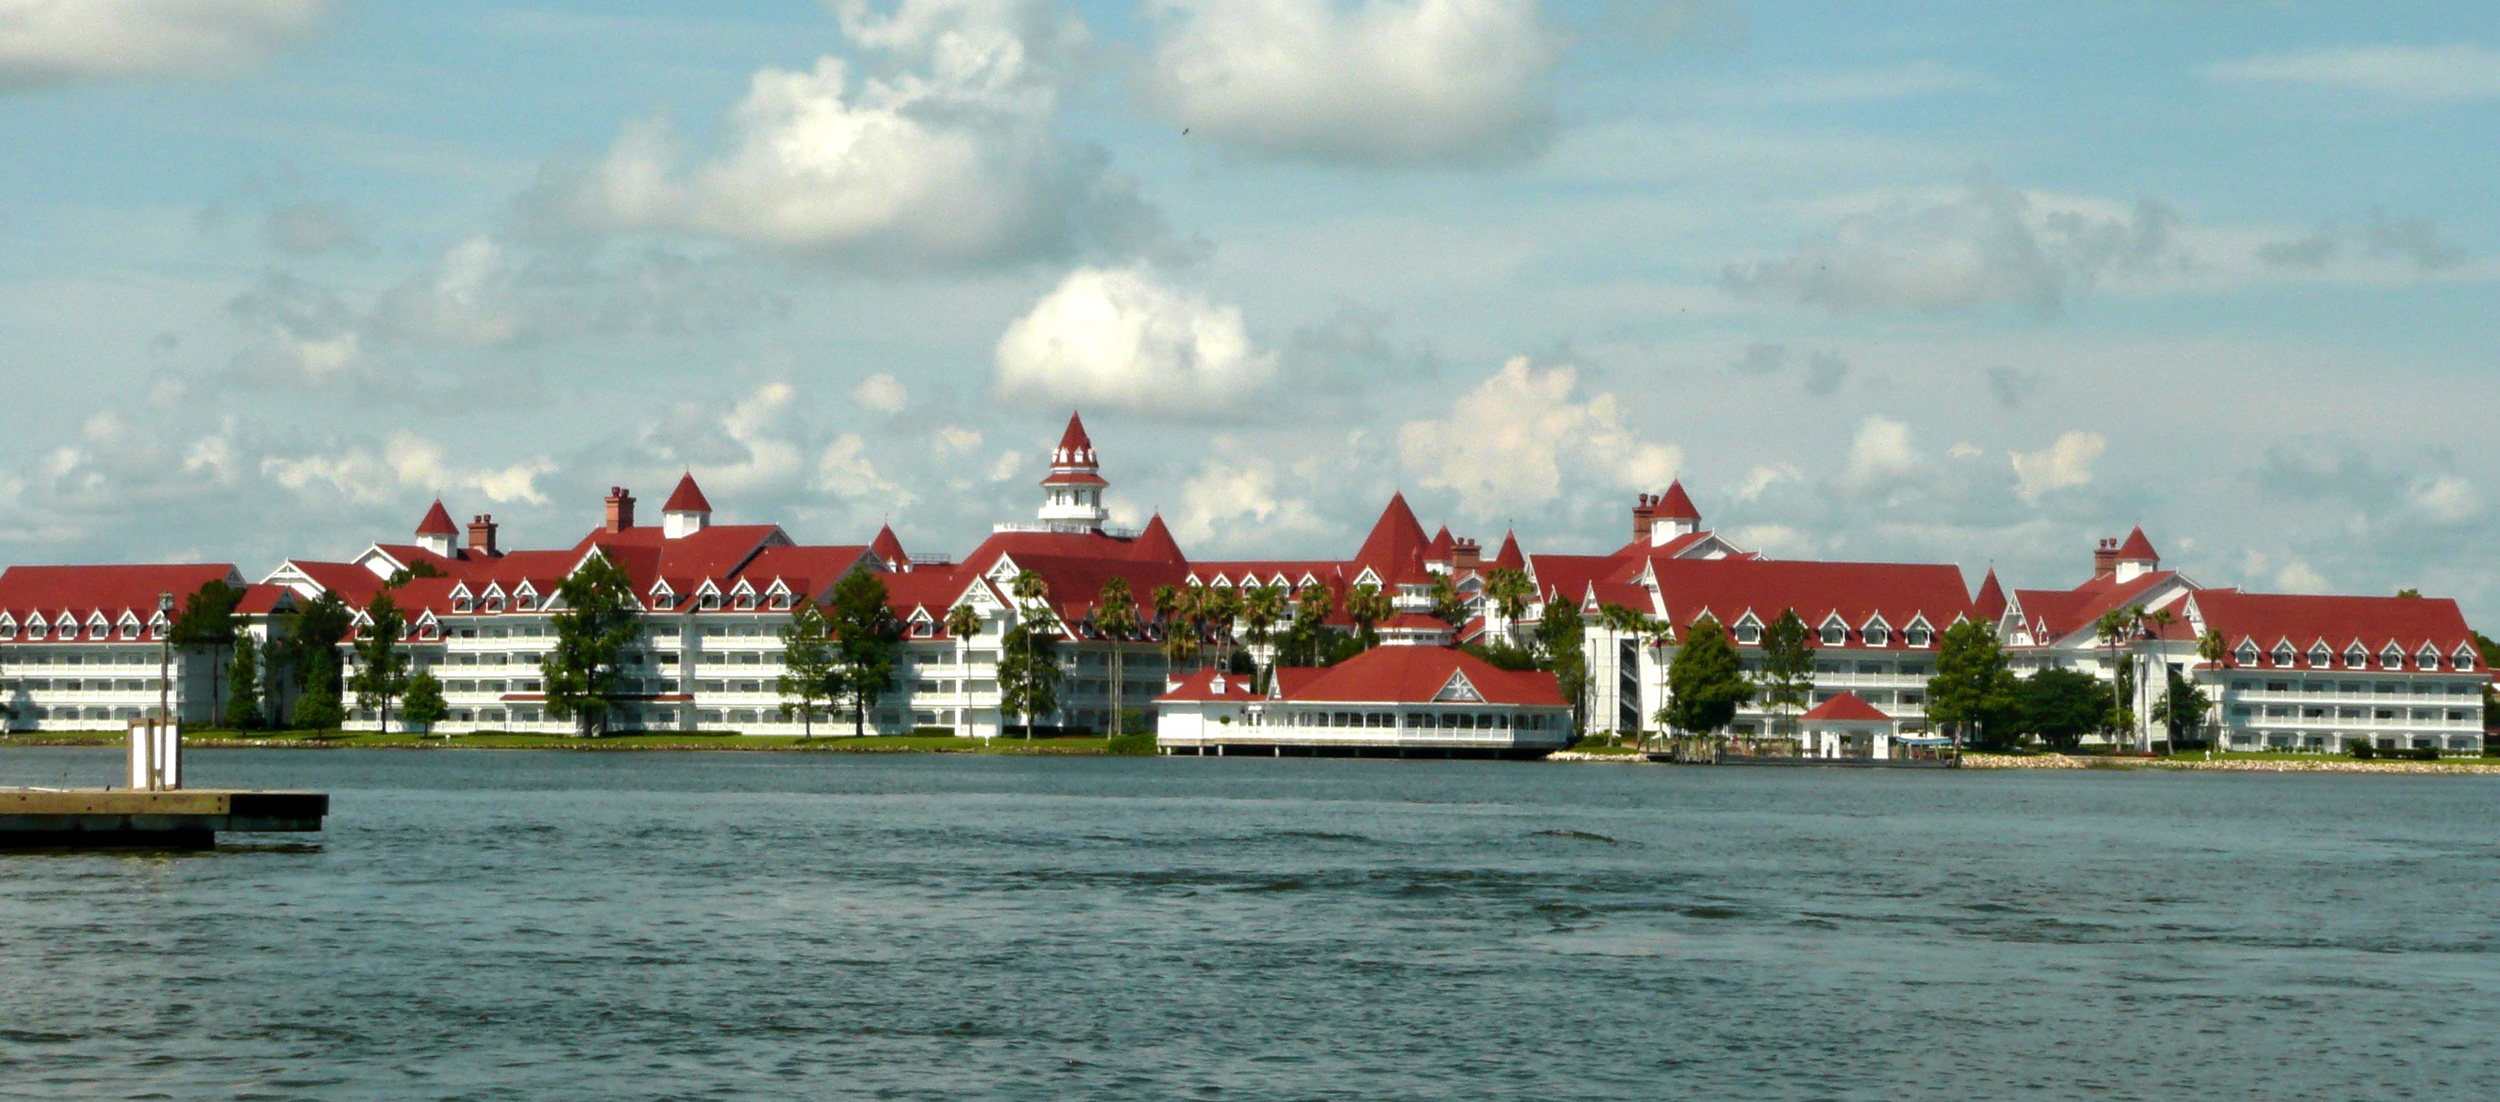 Picture of Disney’s Grand Floridian Resort & Spa